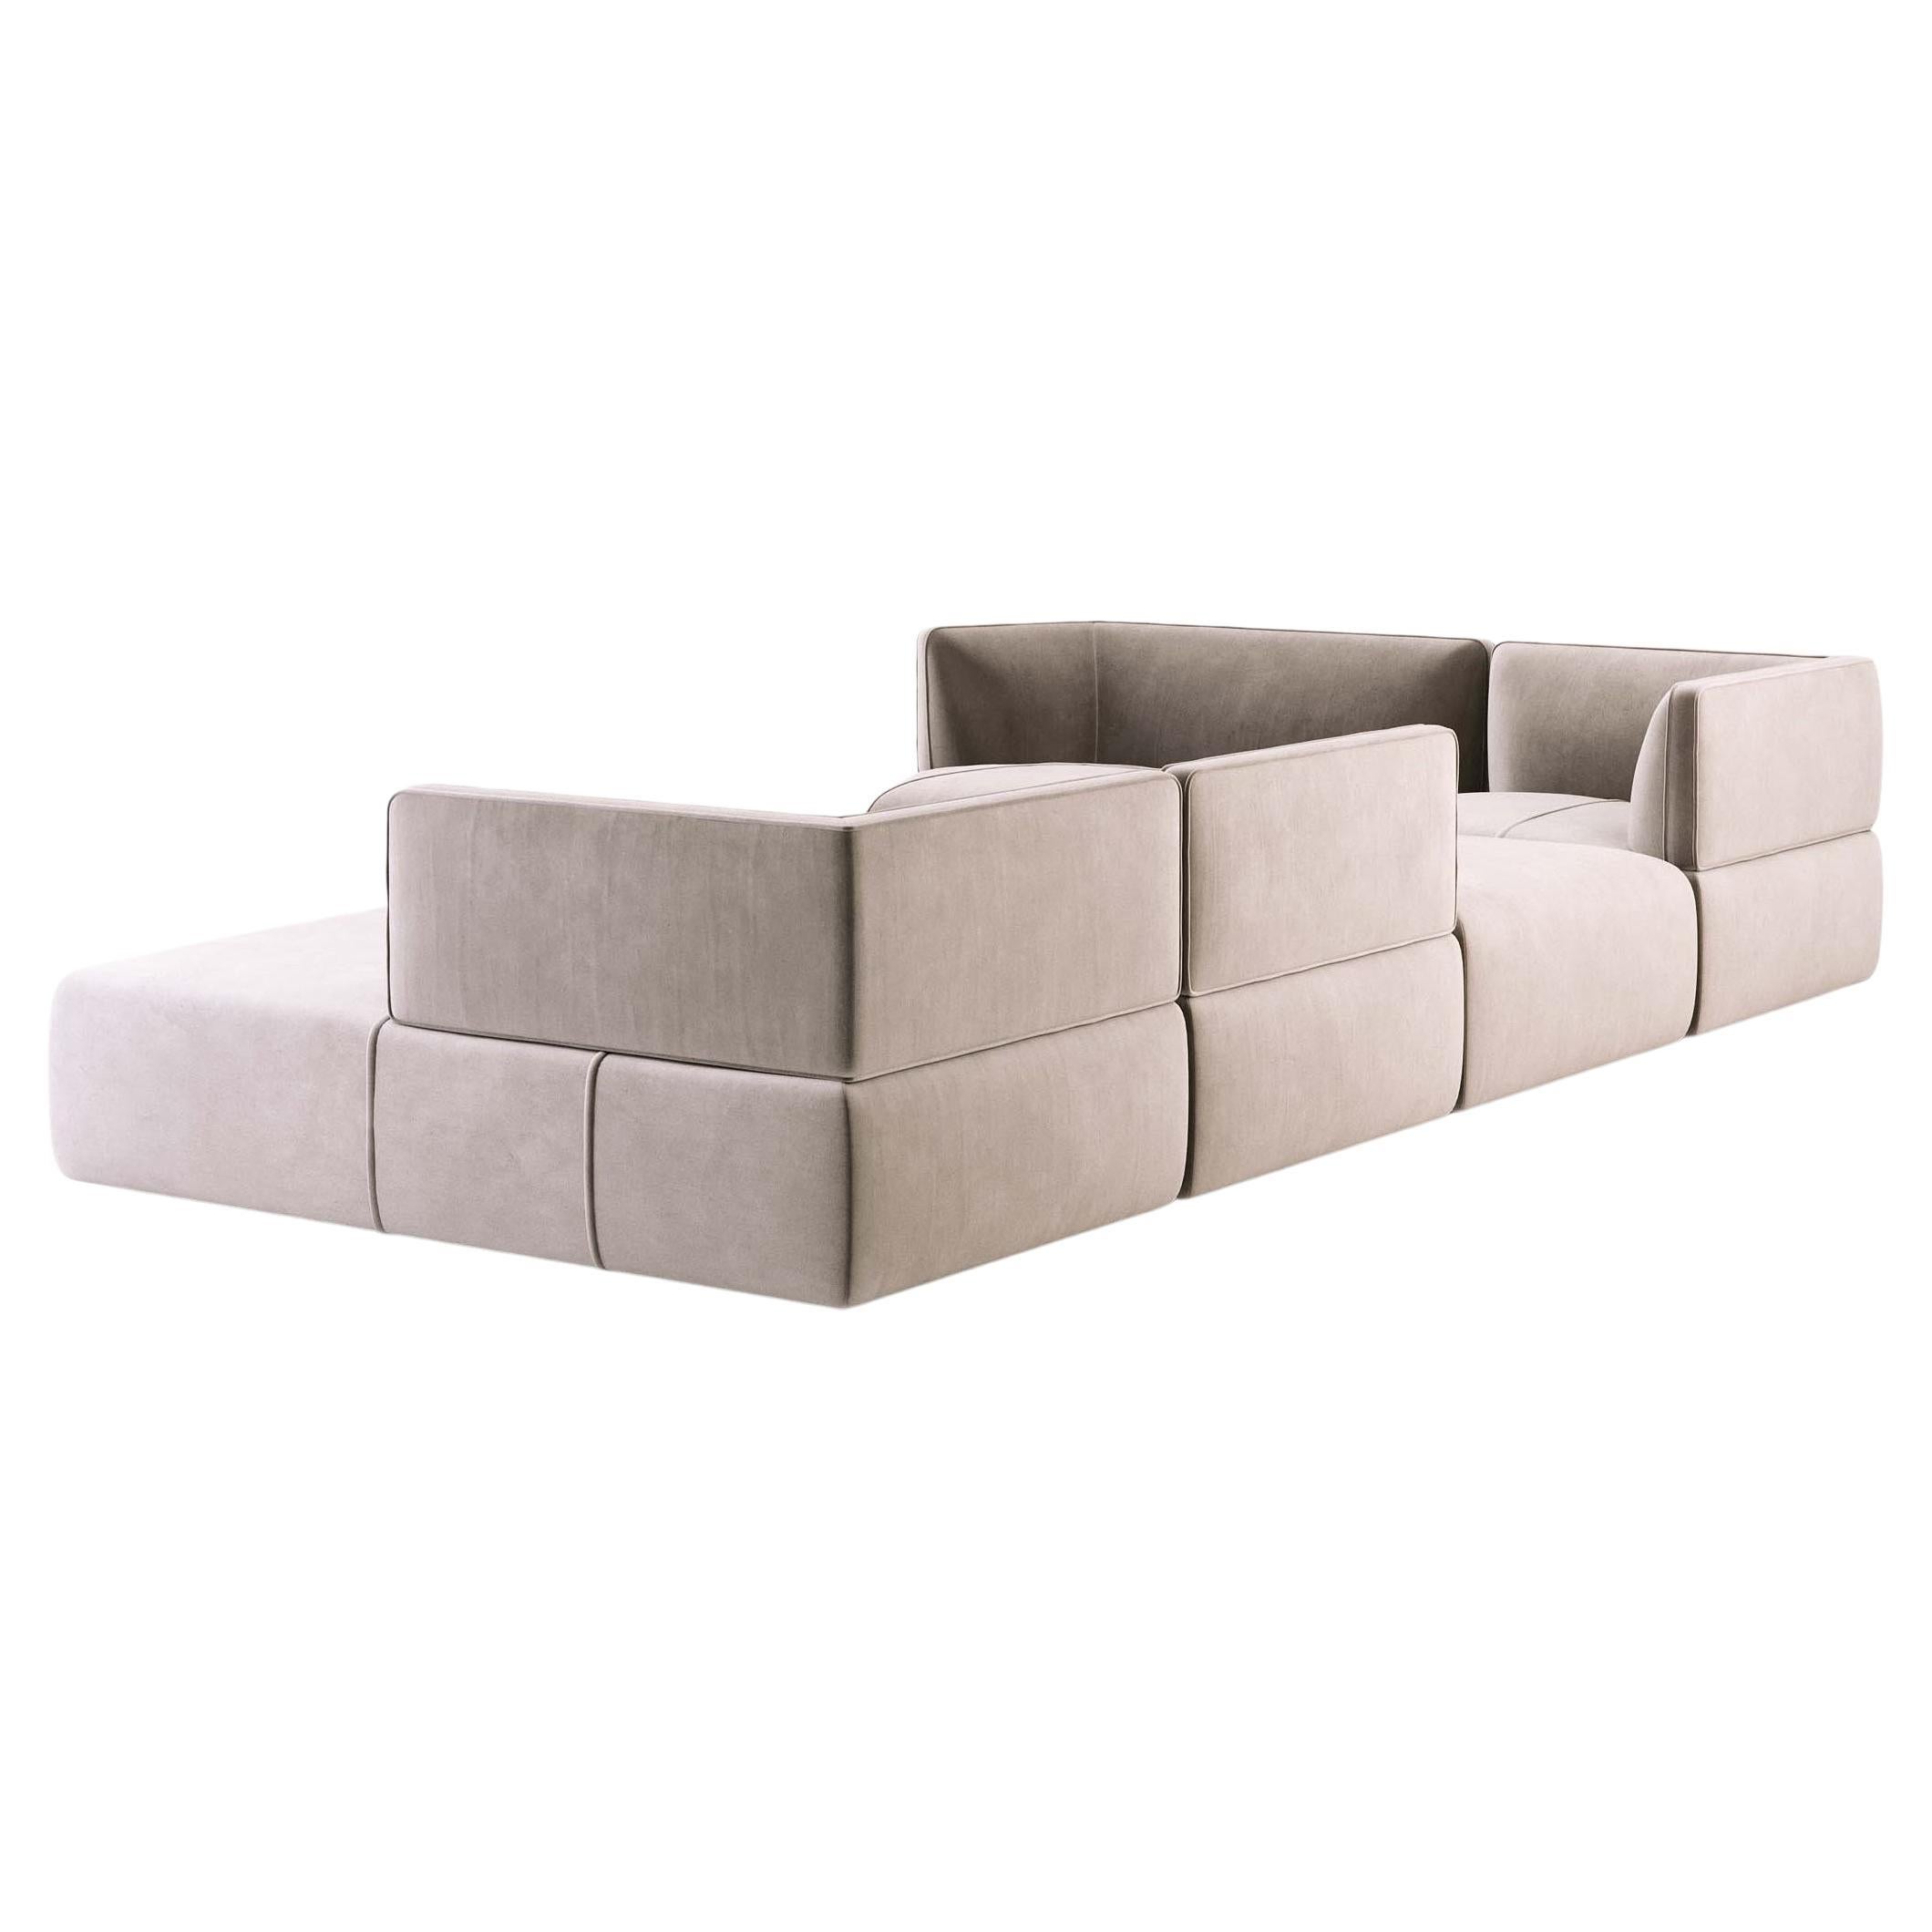 Tailor made and fully upholstered sectional sofa offered in a selection of luxurious, velvet fabrics.
Shown with taupe cotton velvet. All hardwood frame with advanced comfort spring suspension. The seat and back cushions filled with premium